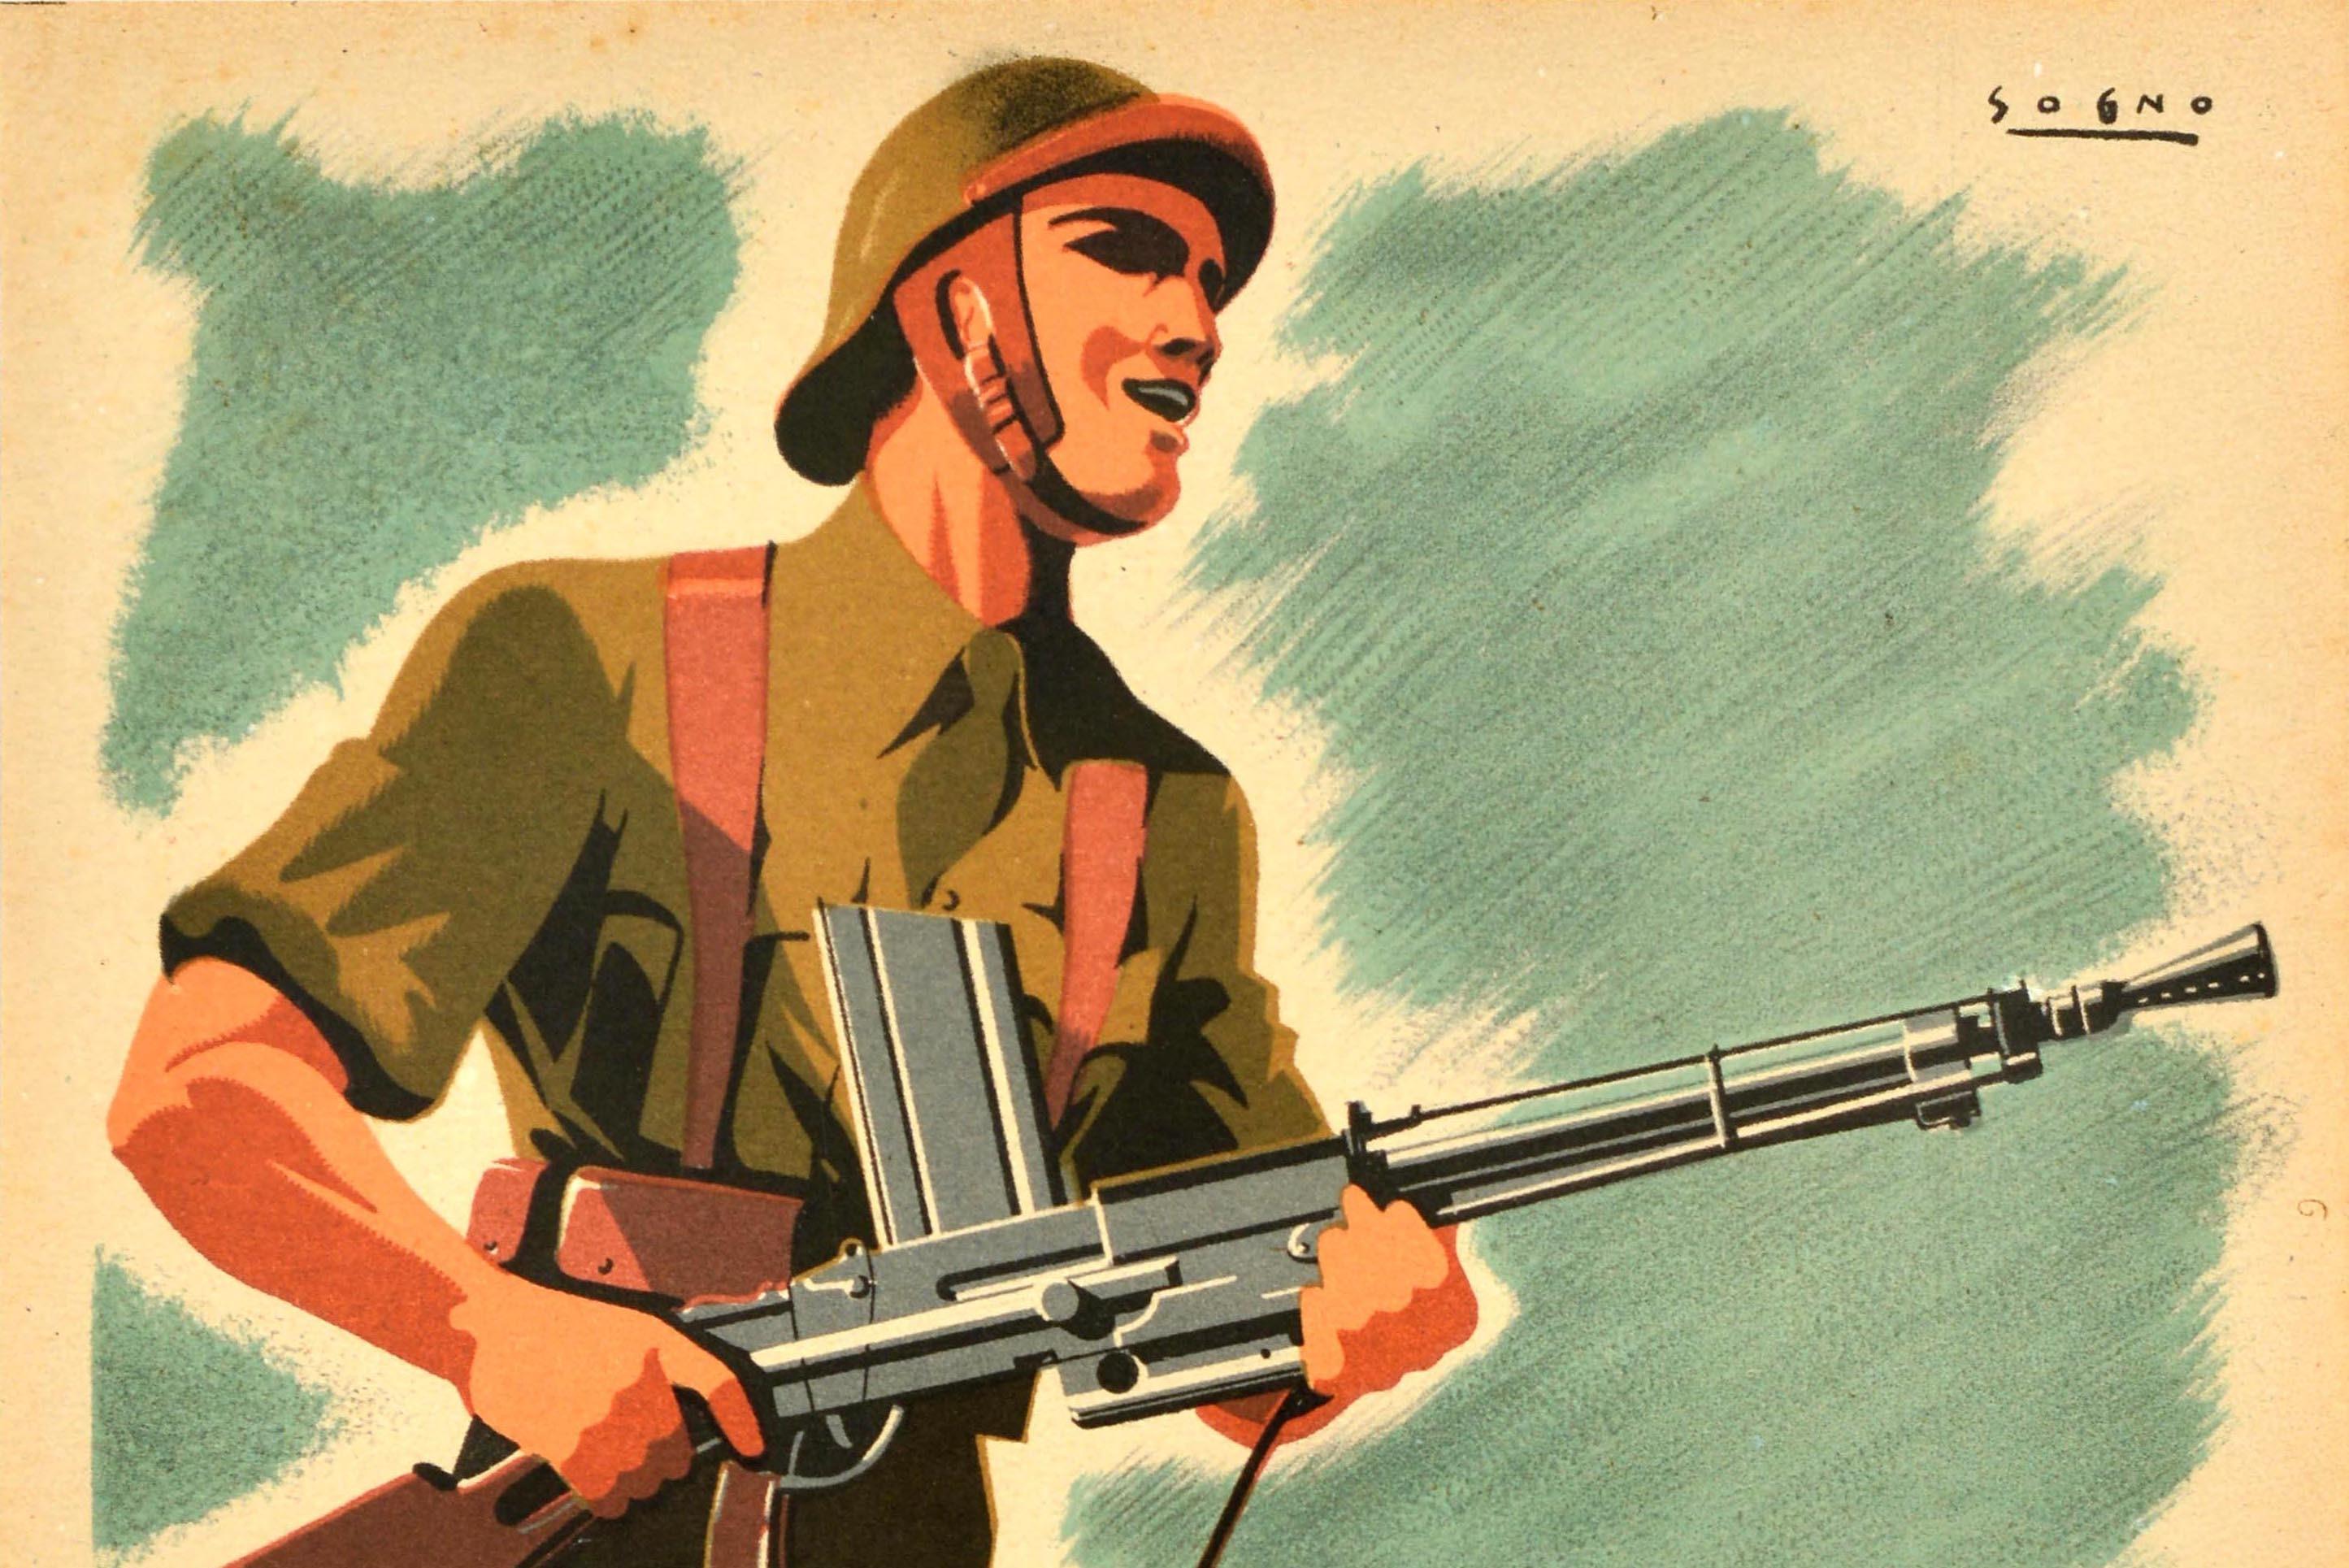 Original vintage World War Two French military recruitment poster - Join The New Army Infantry / Engagez-vous Rengagez-vous dans l'Infanterie de l'Armee Nouvelle - featuring an illustration of a soldier in uniform running with a gun against the blue